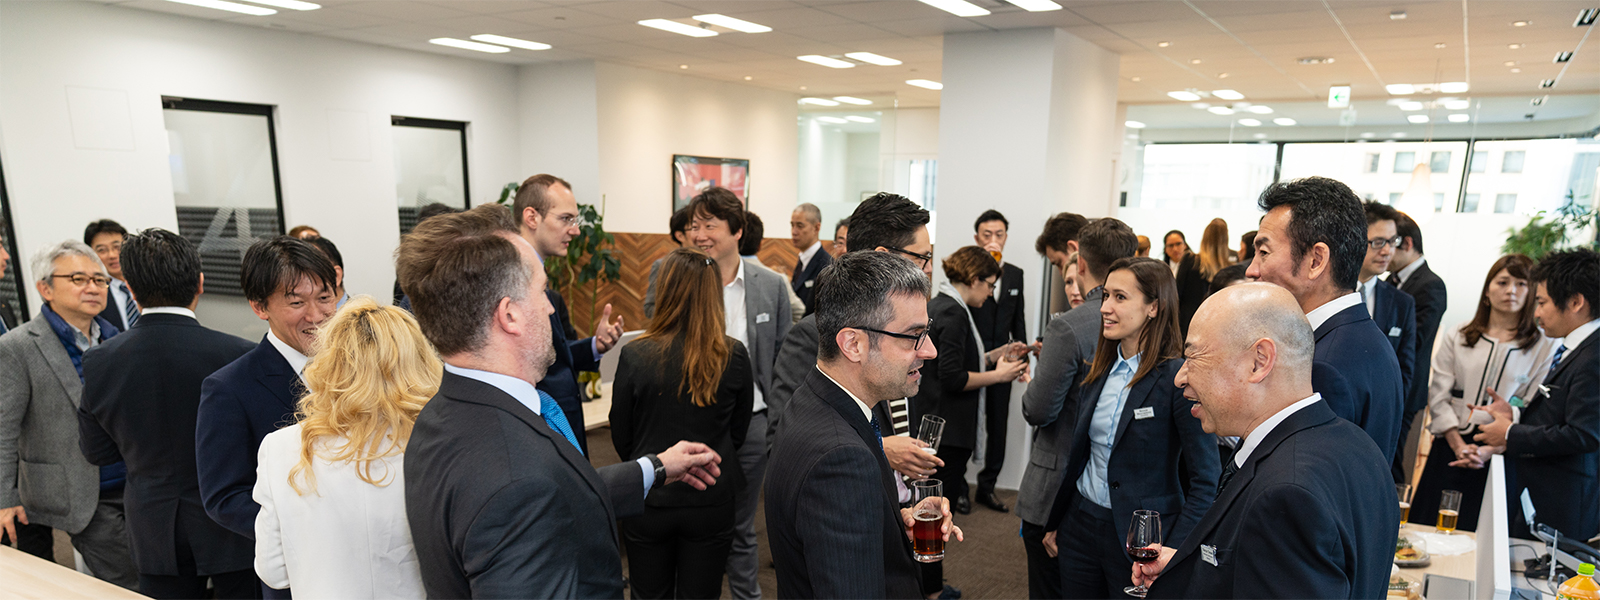 Ambassador opens our new Tokyo office to enable continued business expansion 